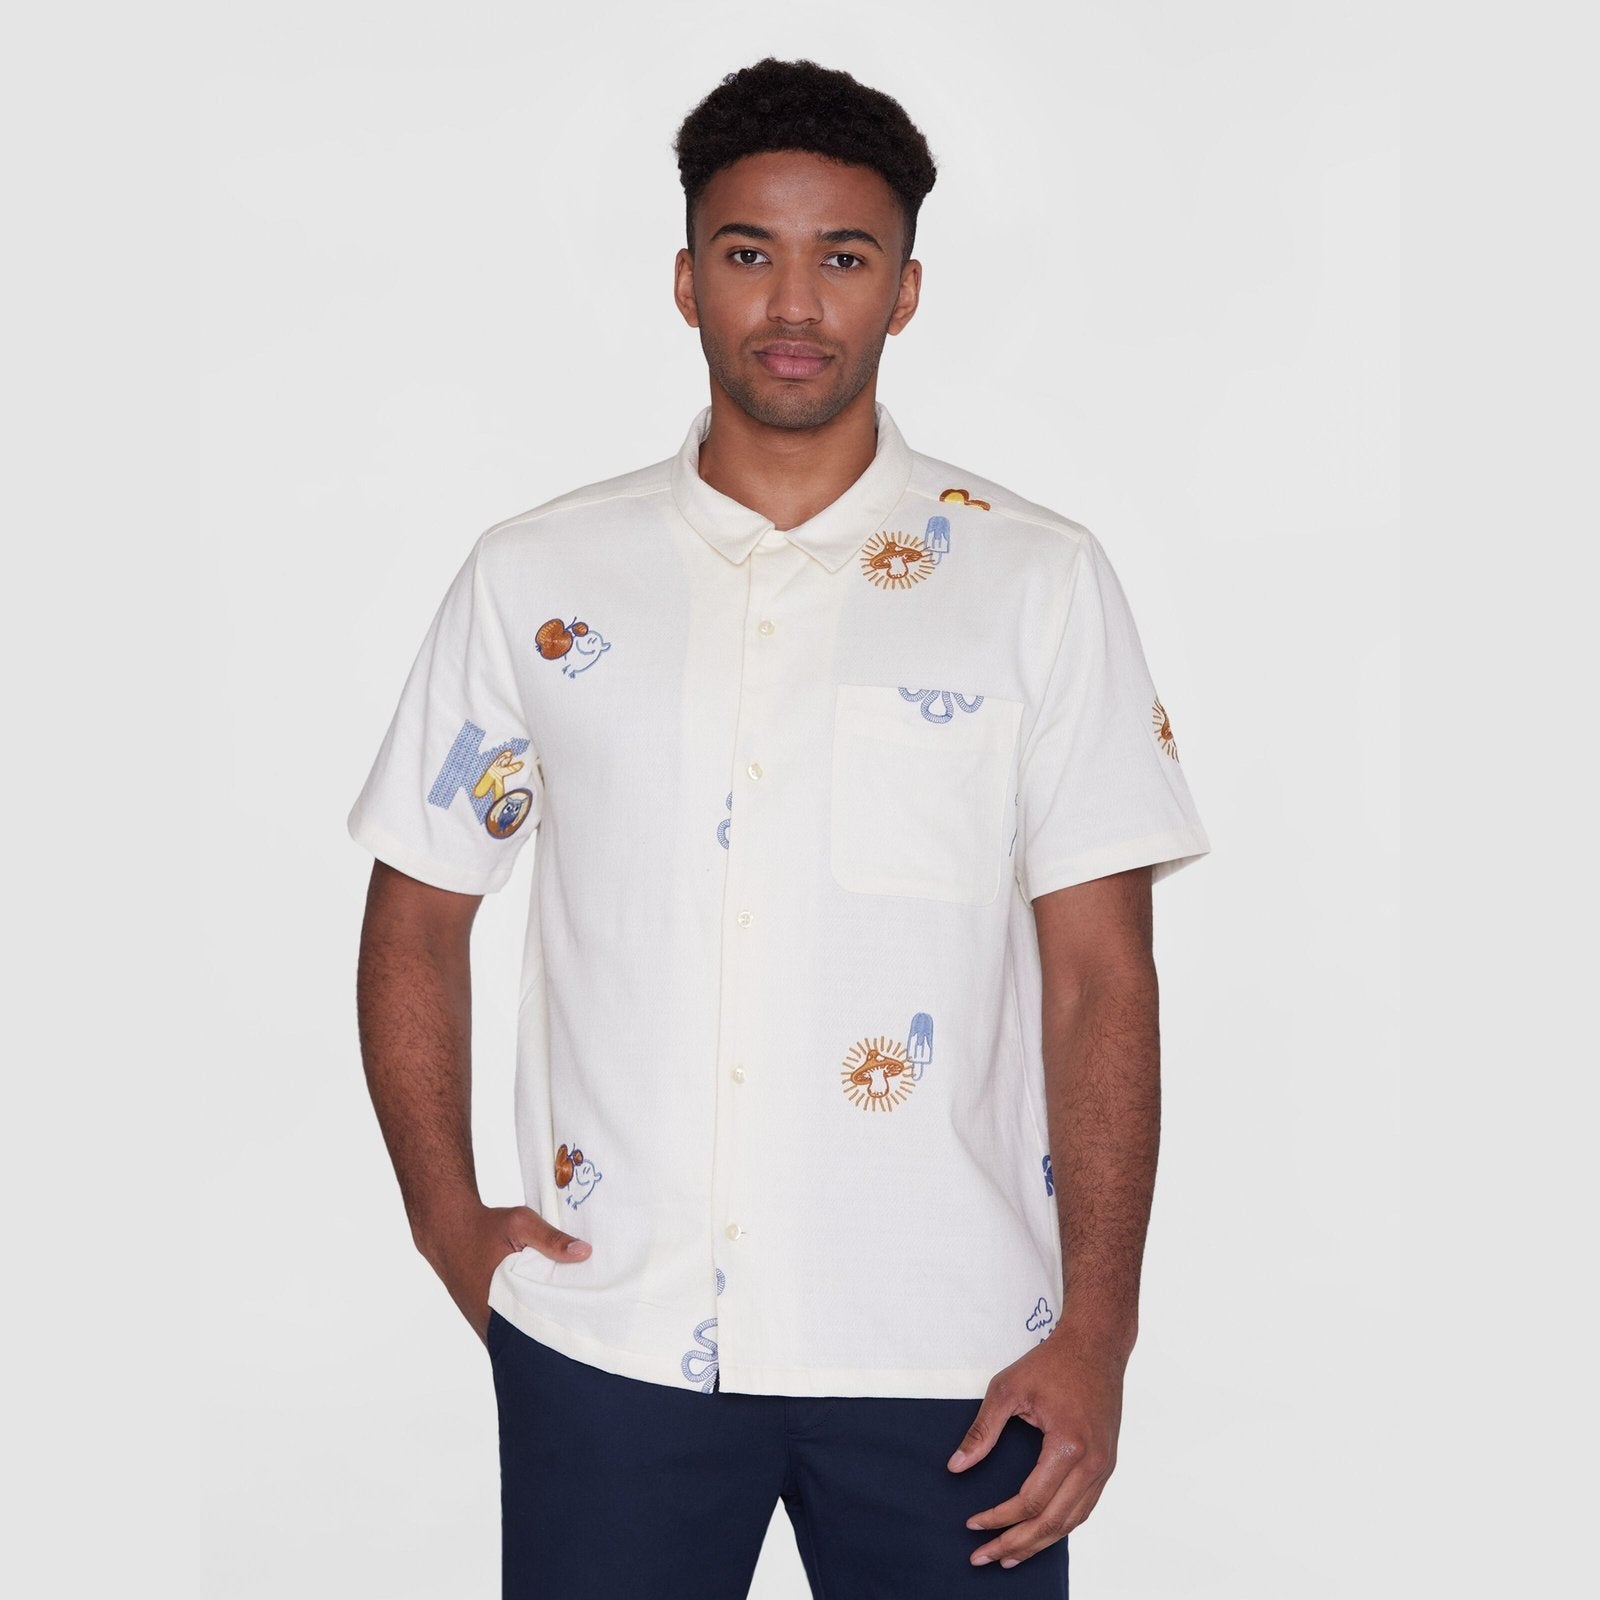 Knowledge Cotton Apparel M Box Fit Short Sleeve Shirt w Embroidery Egret